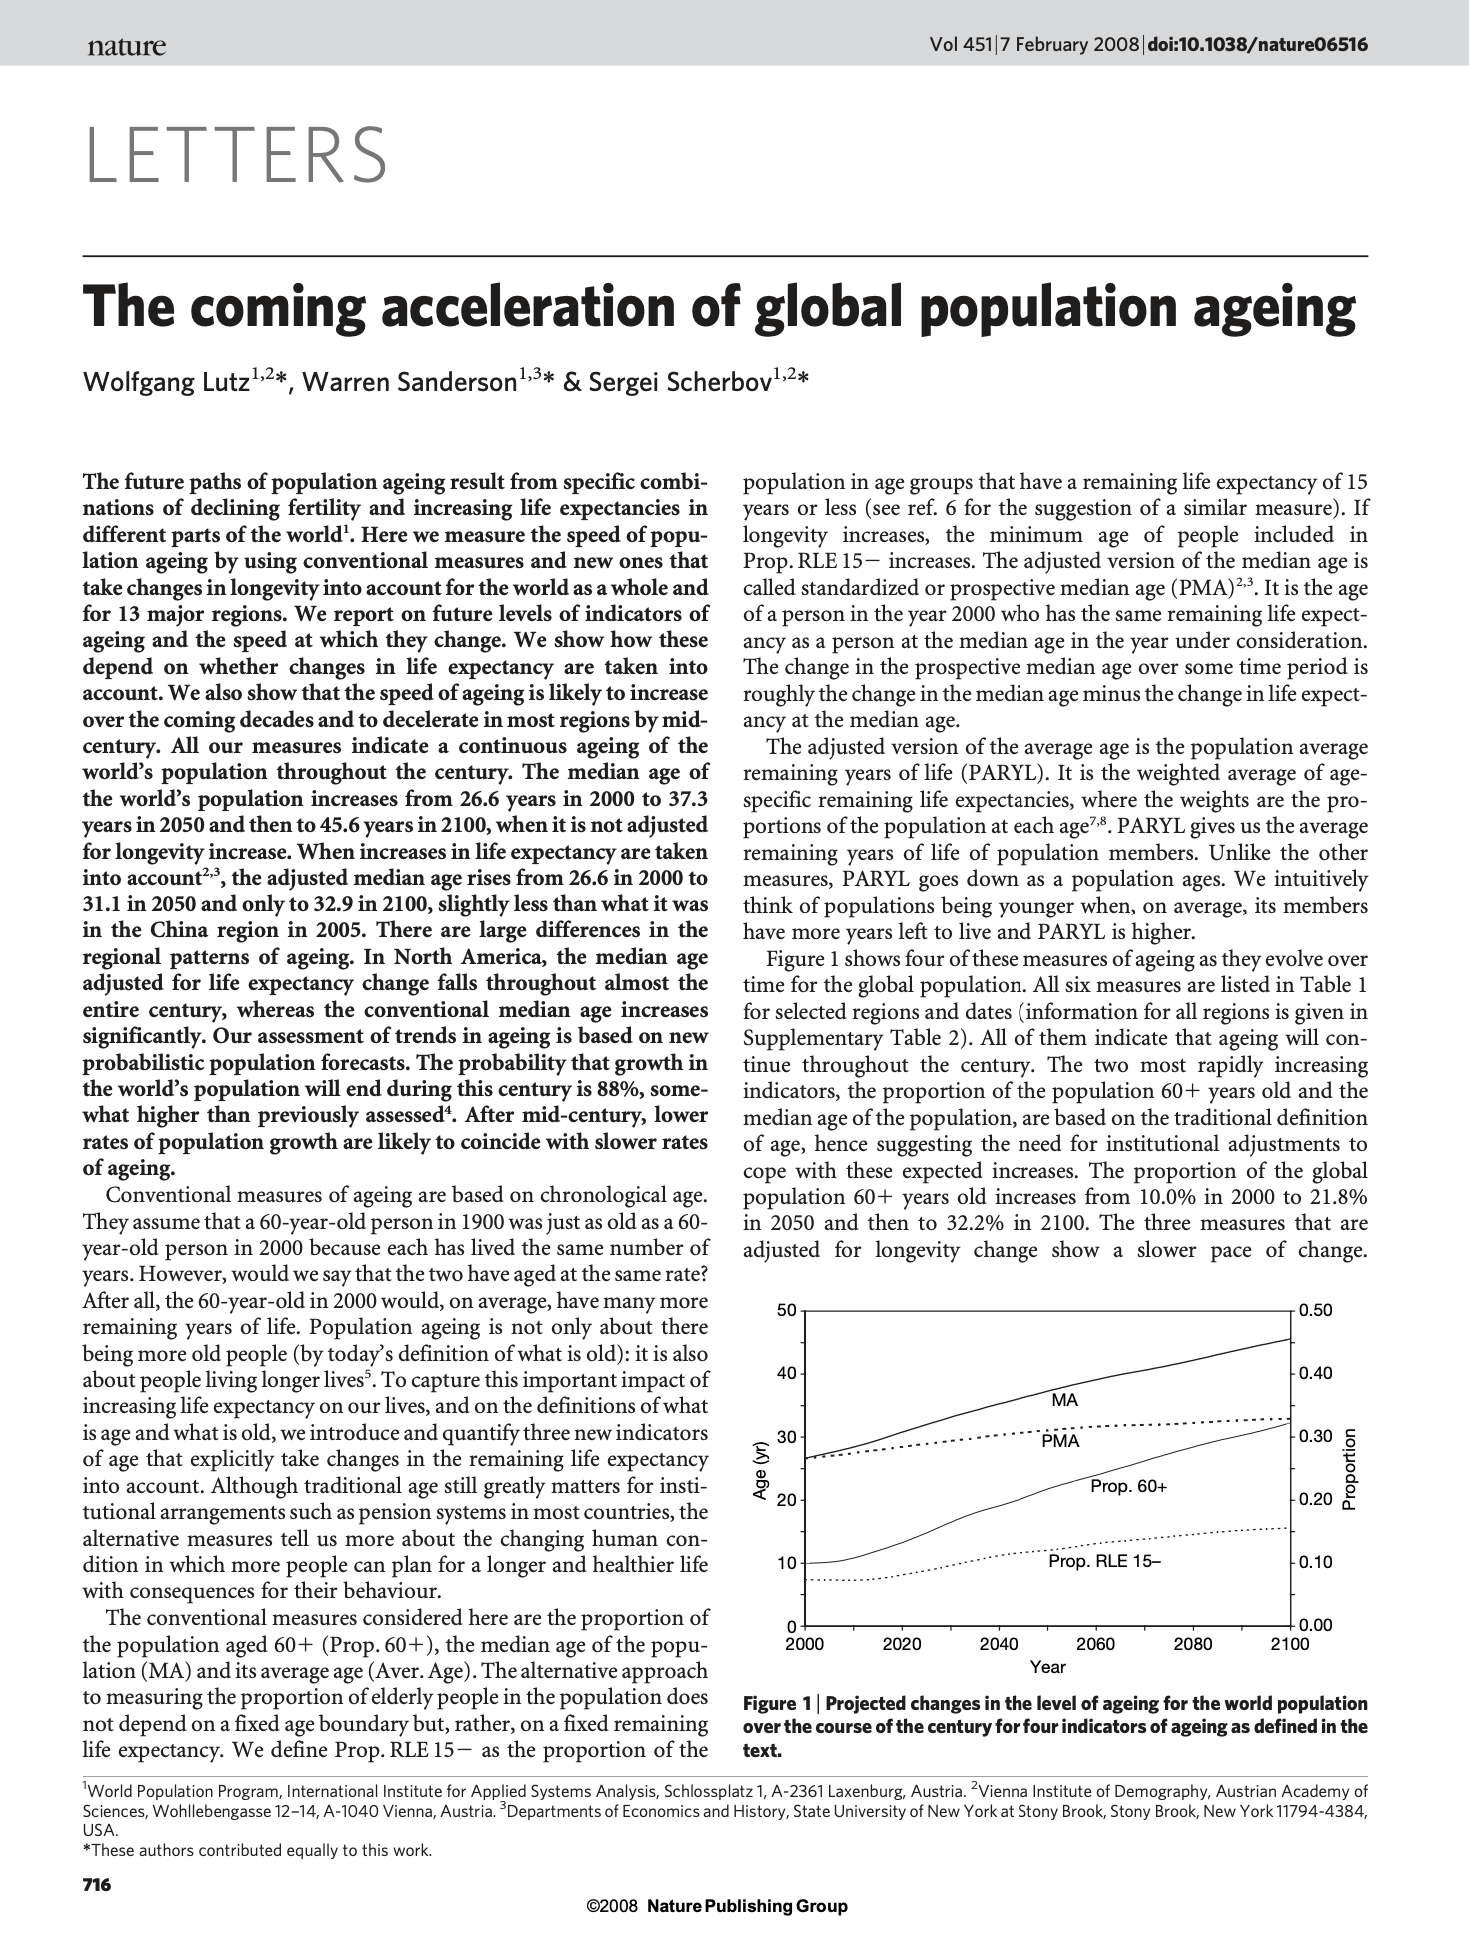 Publication: Lutz, W., Sanderson, W.C., & Scherbov, S. The coming acceleration of global population aging. Nature, 451(7179), 716–719